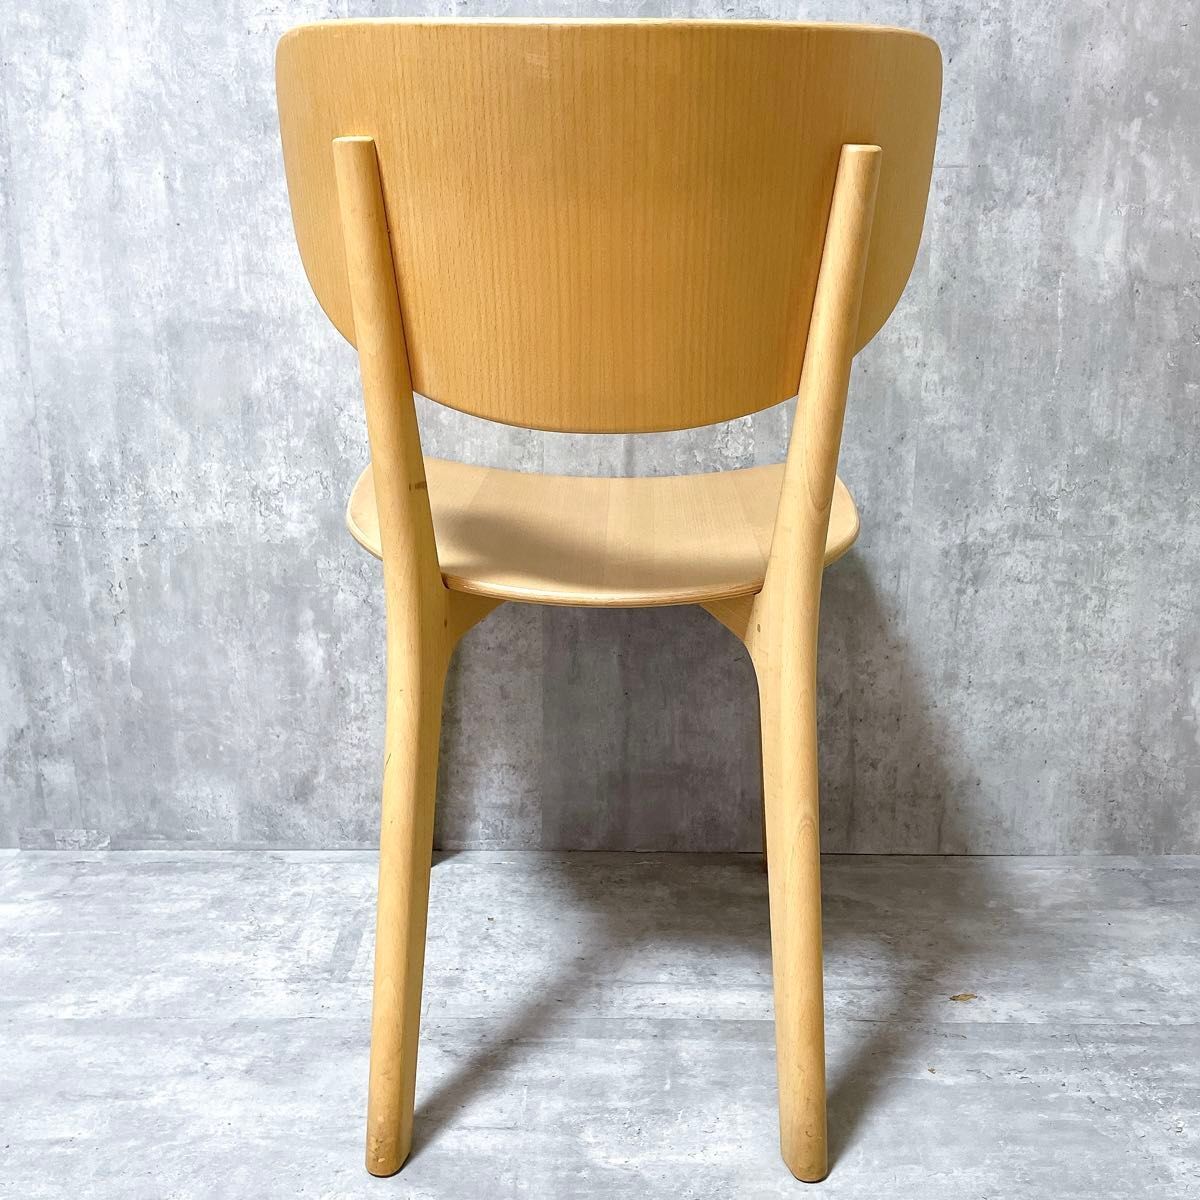  Marni woodworking maruni COLLECTION Marni collection deep . direct person design Roundish natural board "zaisu" seat dining chair dining table interior 